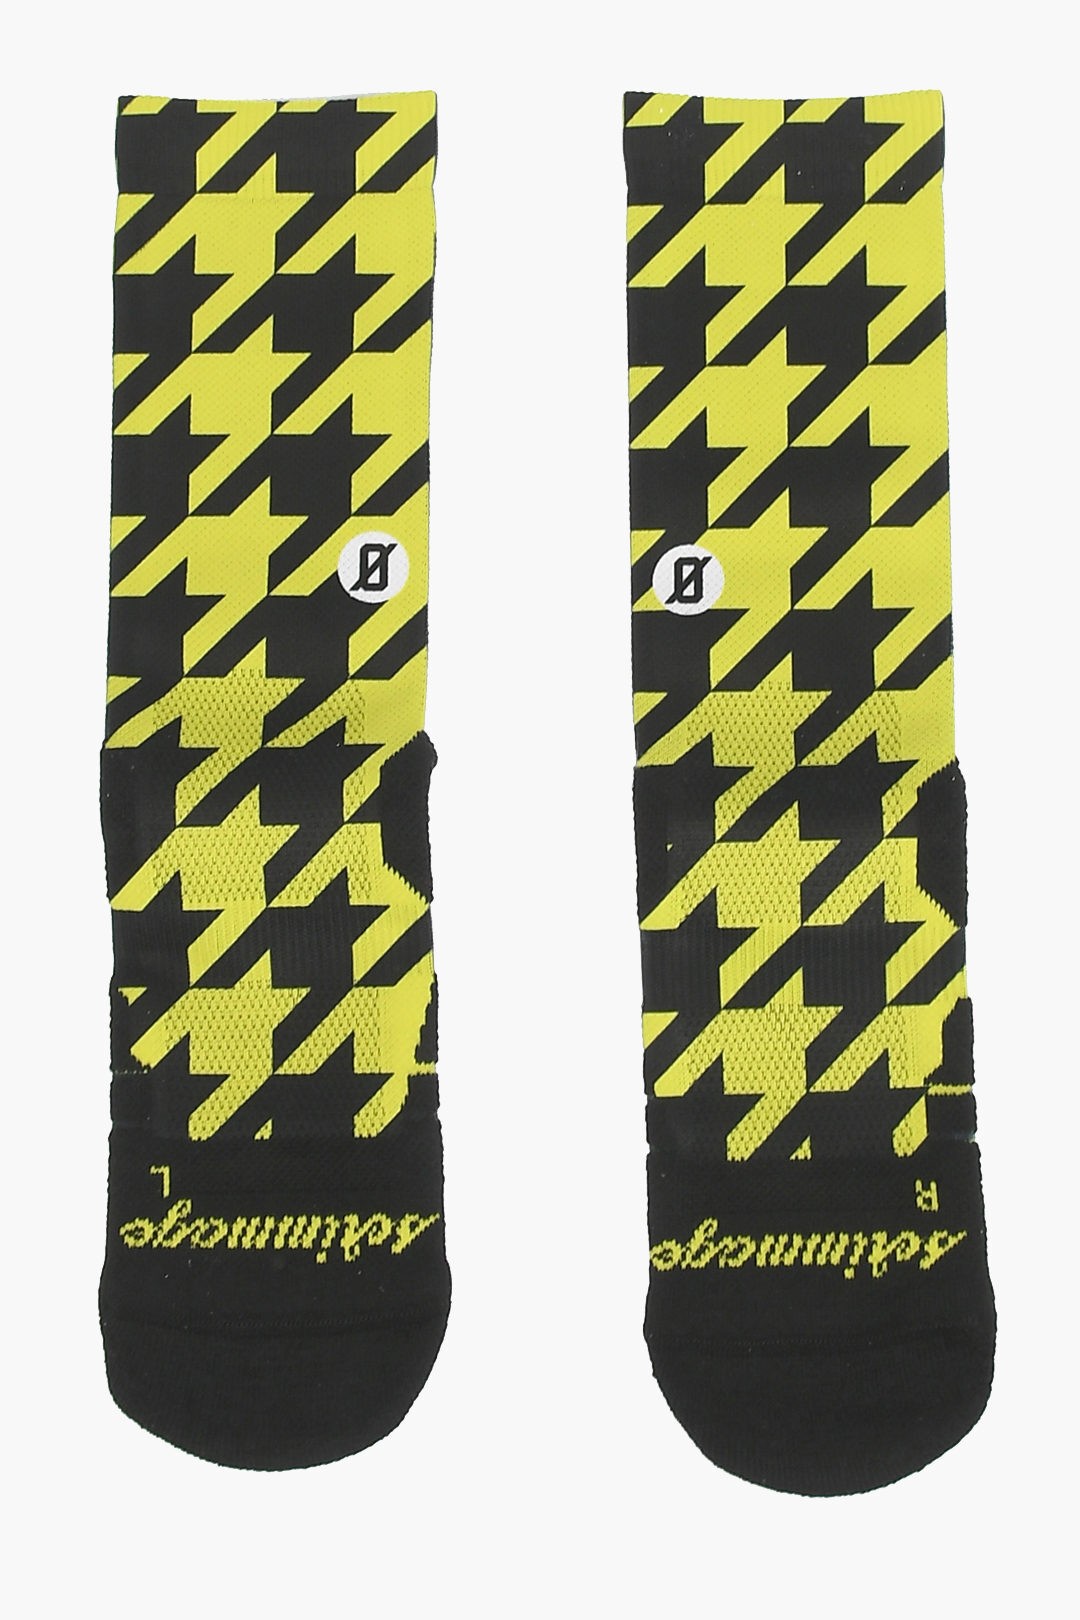 TOOT SCRIMMAGE スクリメージ アンダーウェア PIED POULE YELLOW メンズ HOUNDSTOOTH PATTERNED TWO-TONE SOCKS 【関税・送料無料】【ラッピング無料】 dk